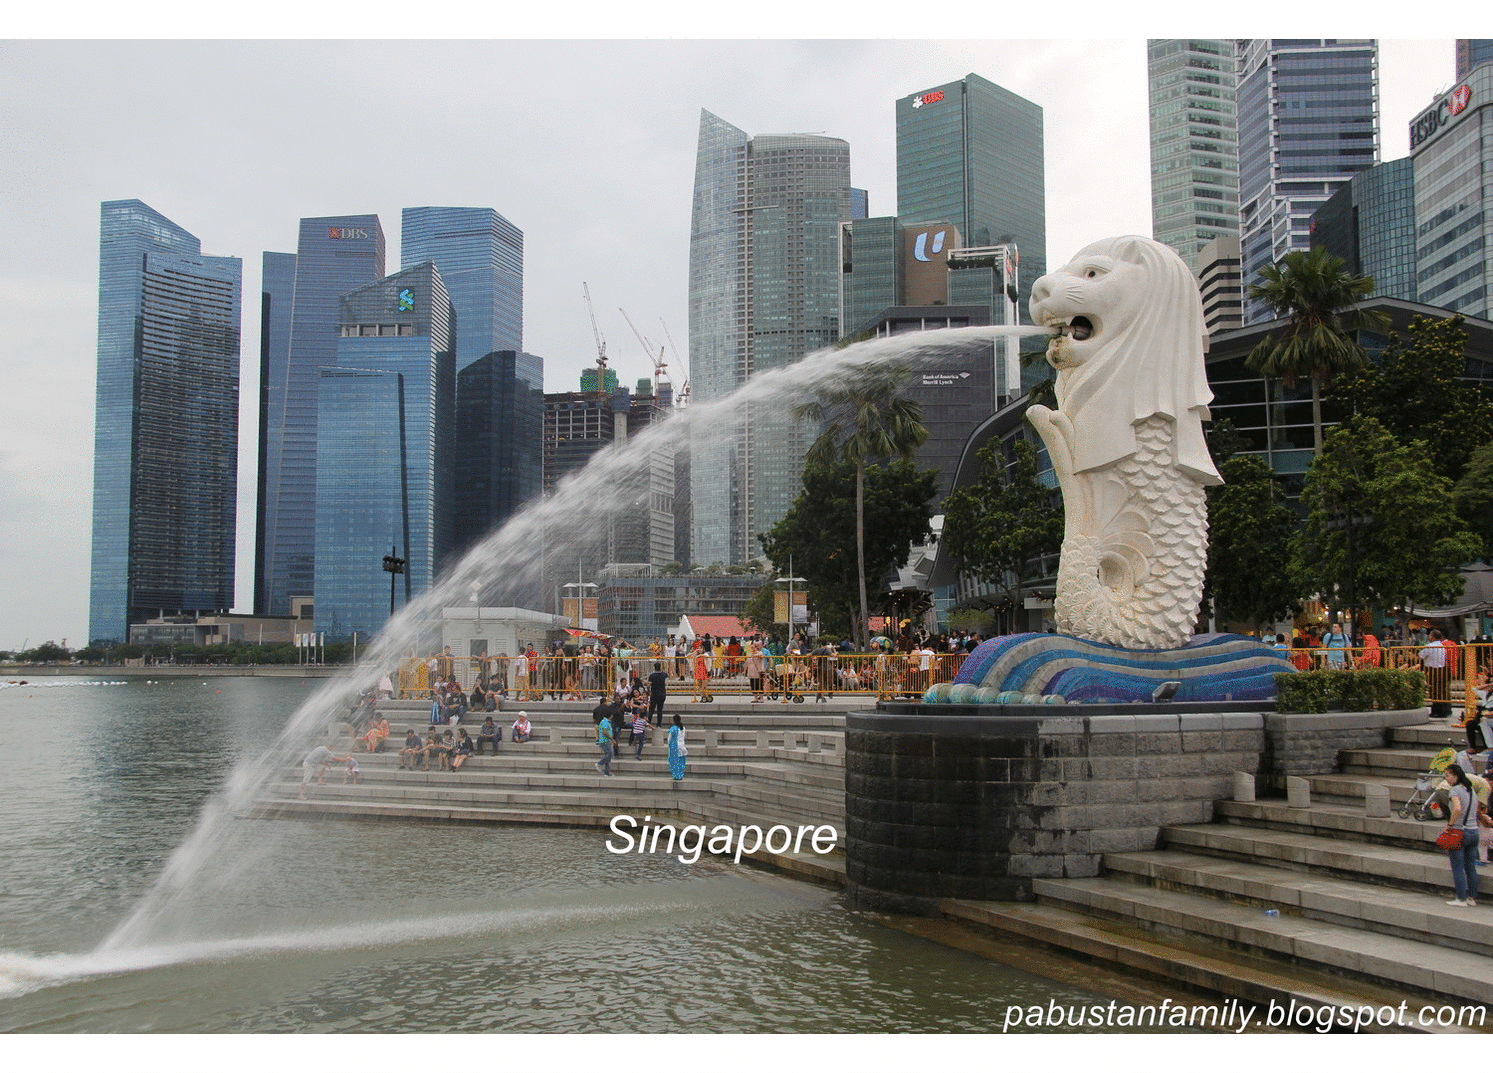 Places Visited in Singapore